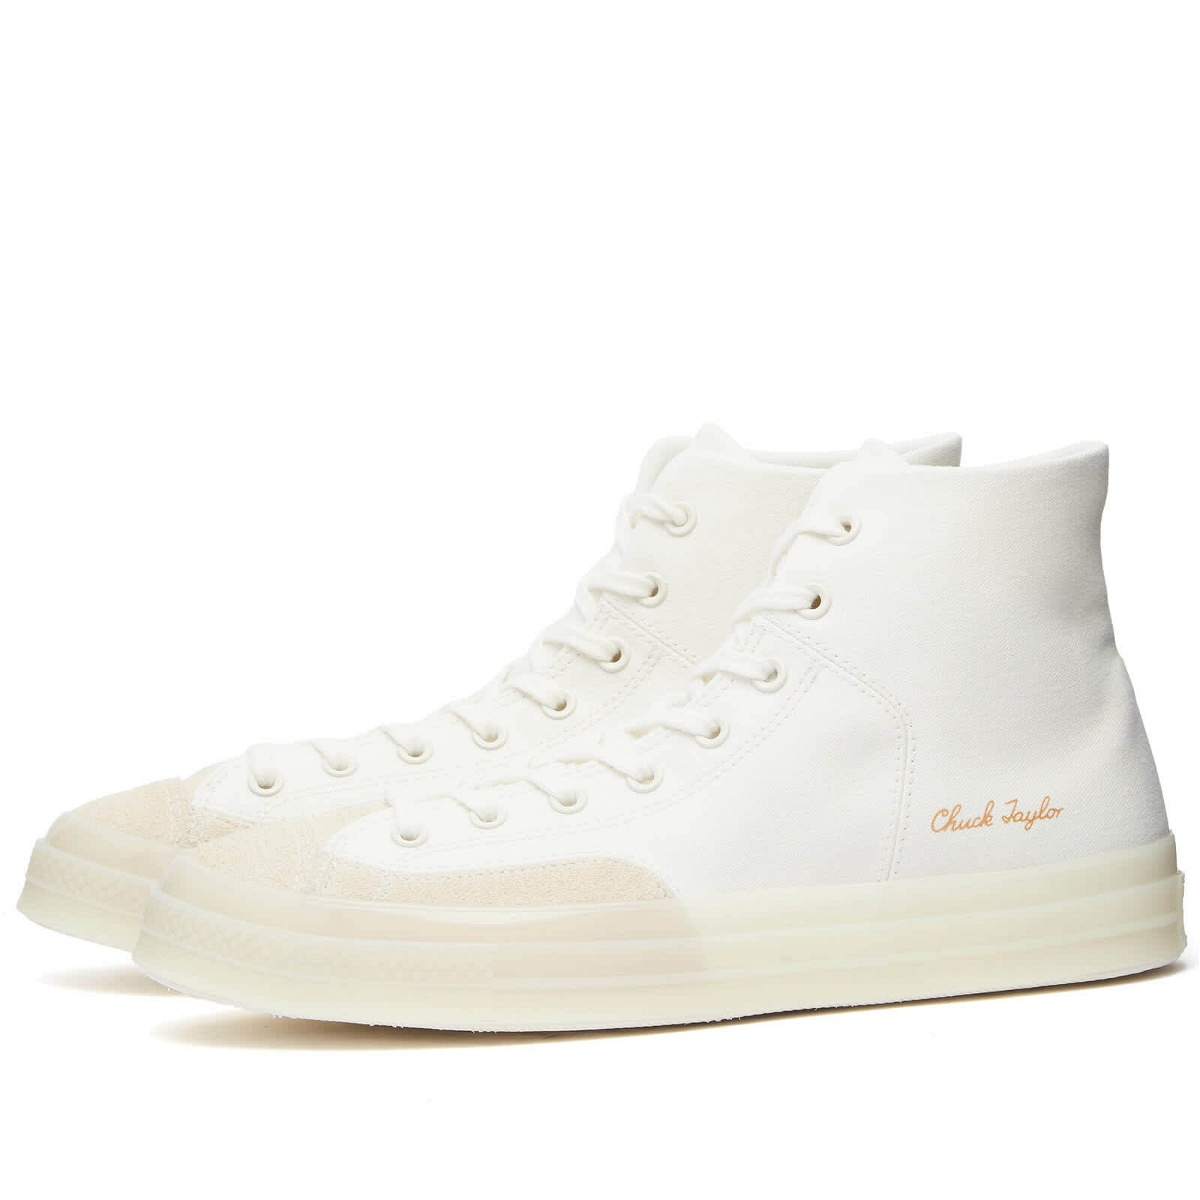 Converse Chuck Taylor 1970s Marquis Sneakers in Vintage White/Natural ...